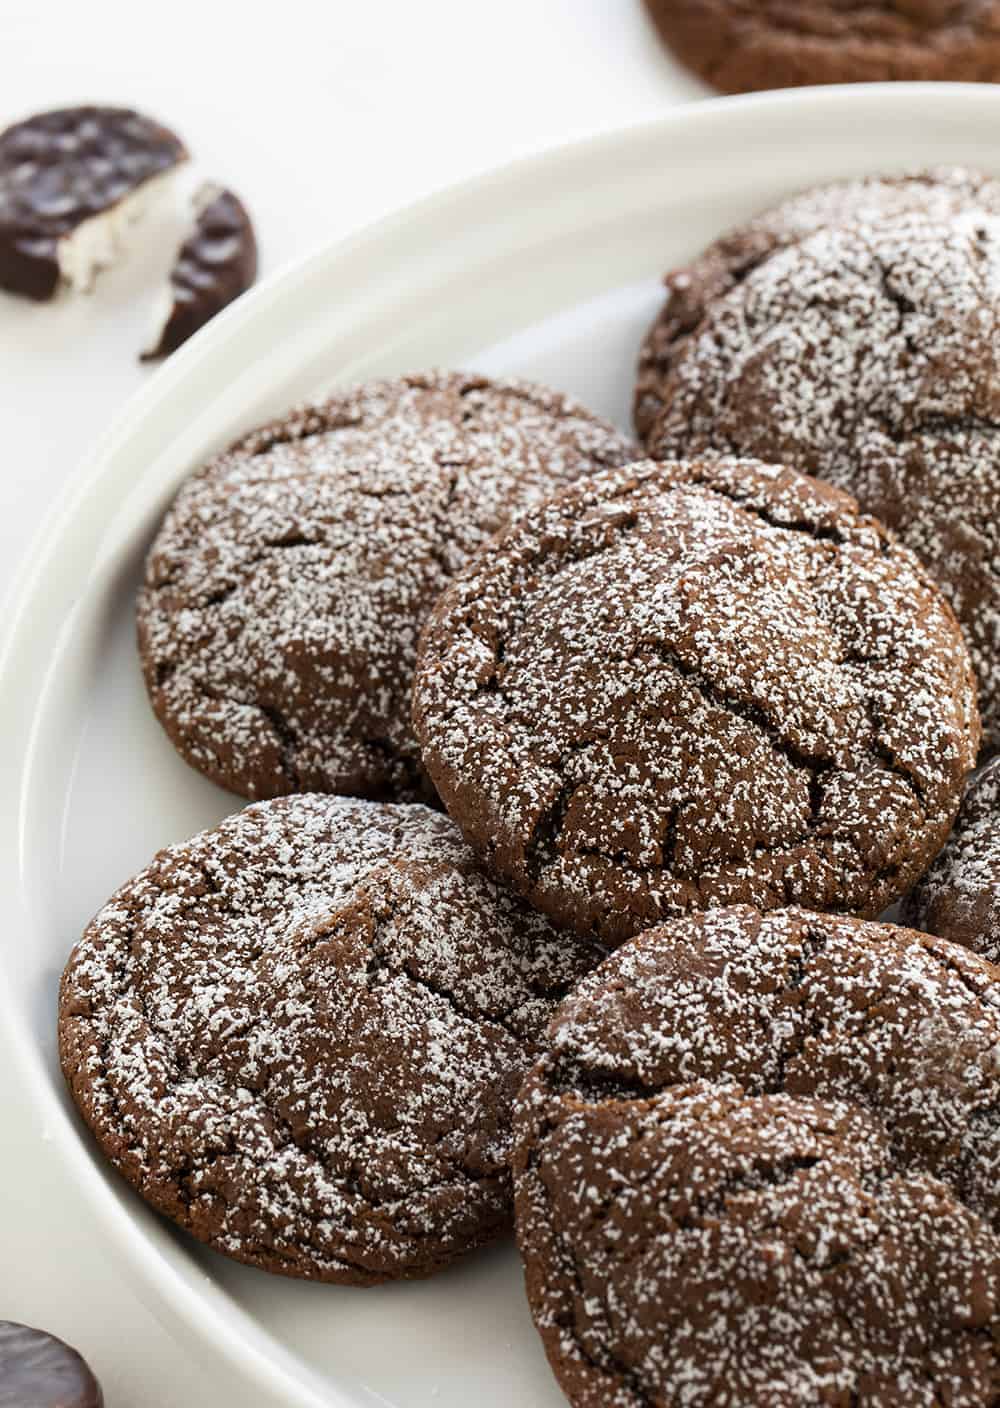 Peppermint Patty Stuffed Chocolate Cookies on a White Plate